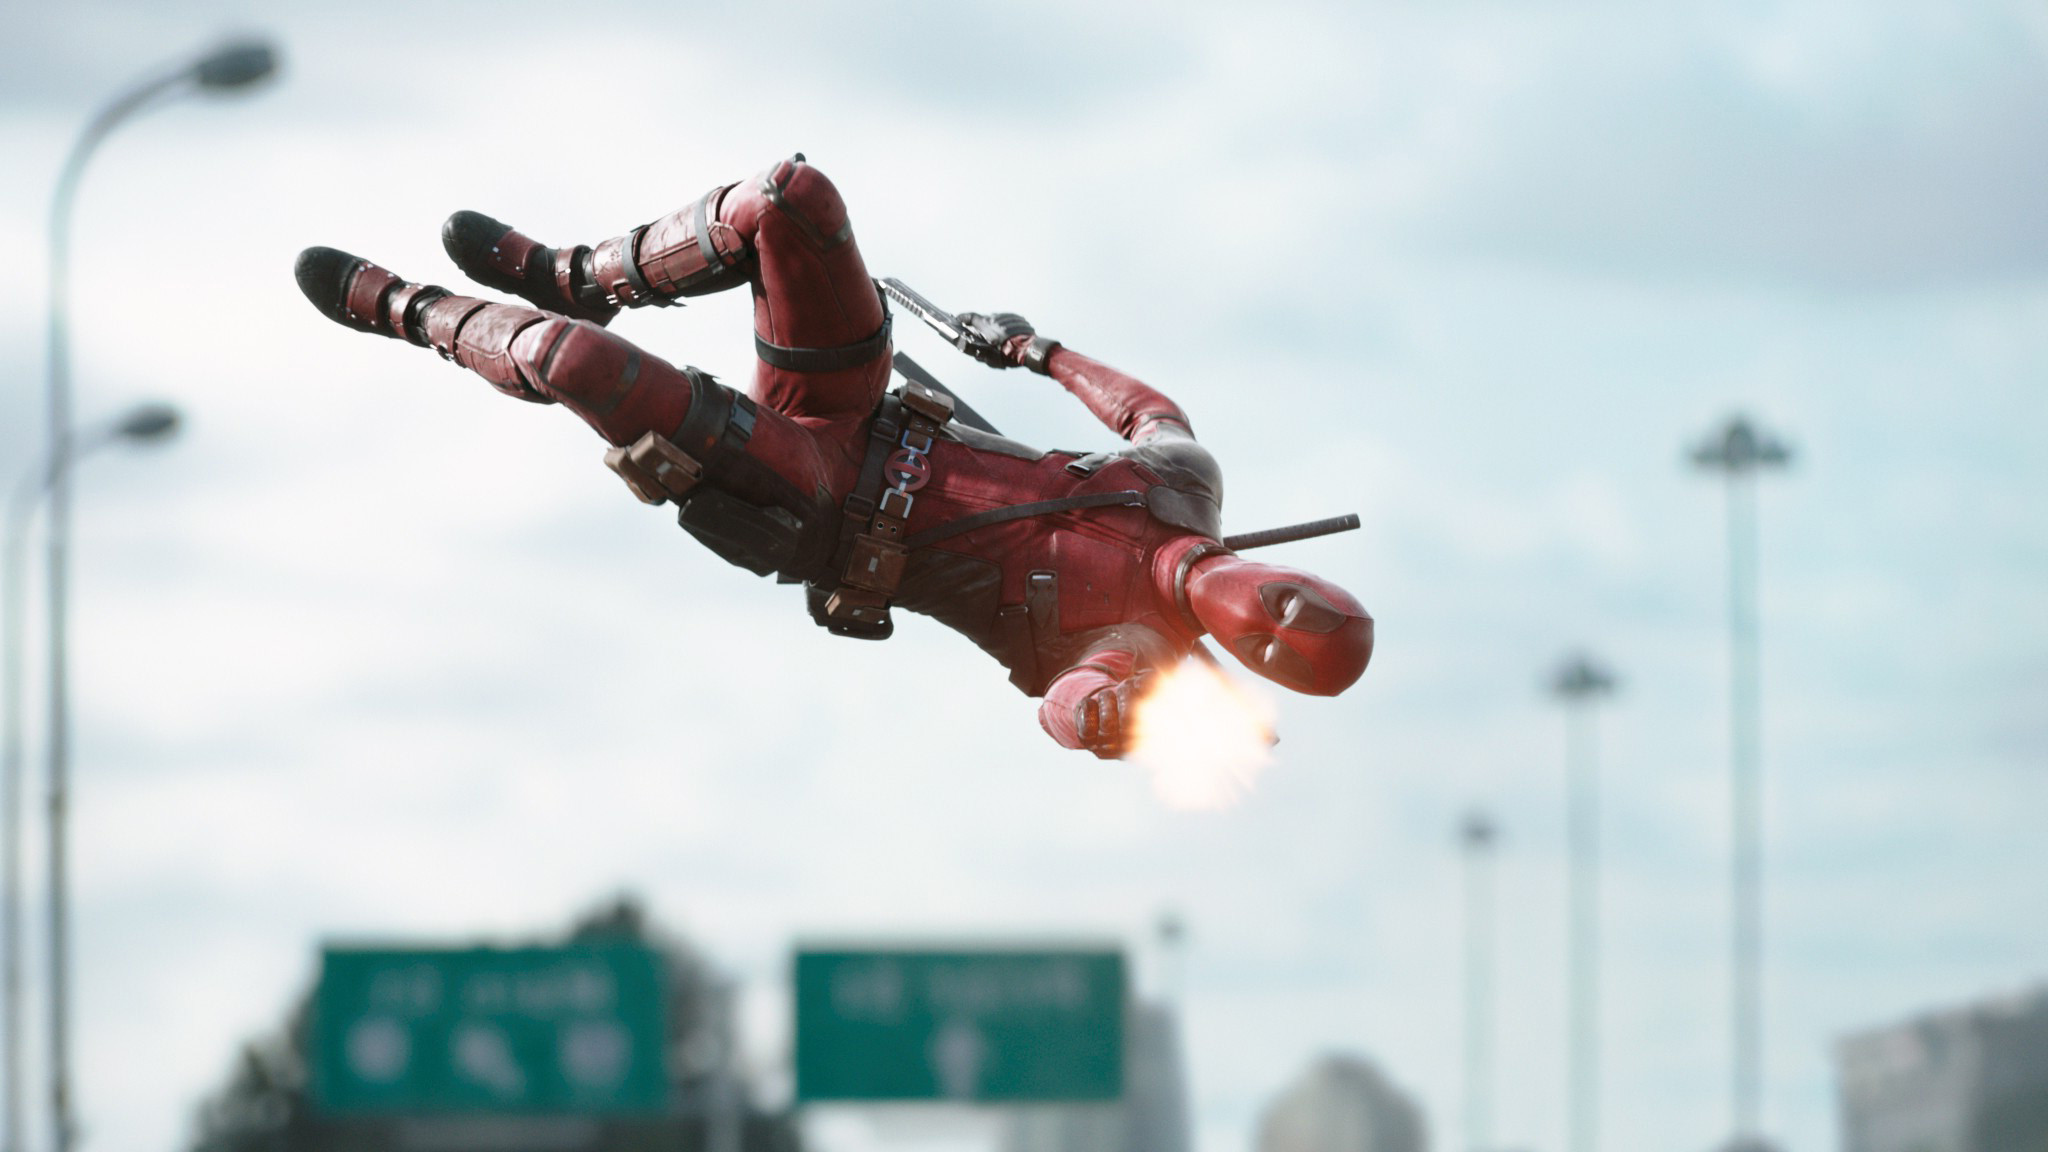 Deadpool Movie 2016 Wallpaper : HD Wallpapers available in different  resolution and sizes for our computer desktop backgrounds, laptop & mobile  phones.